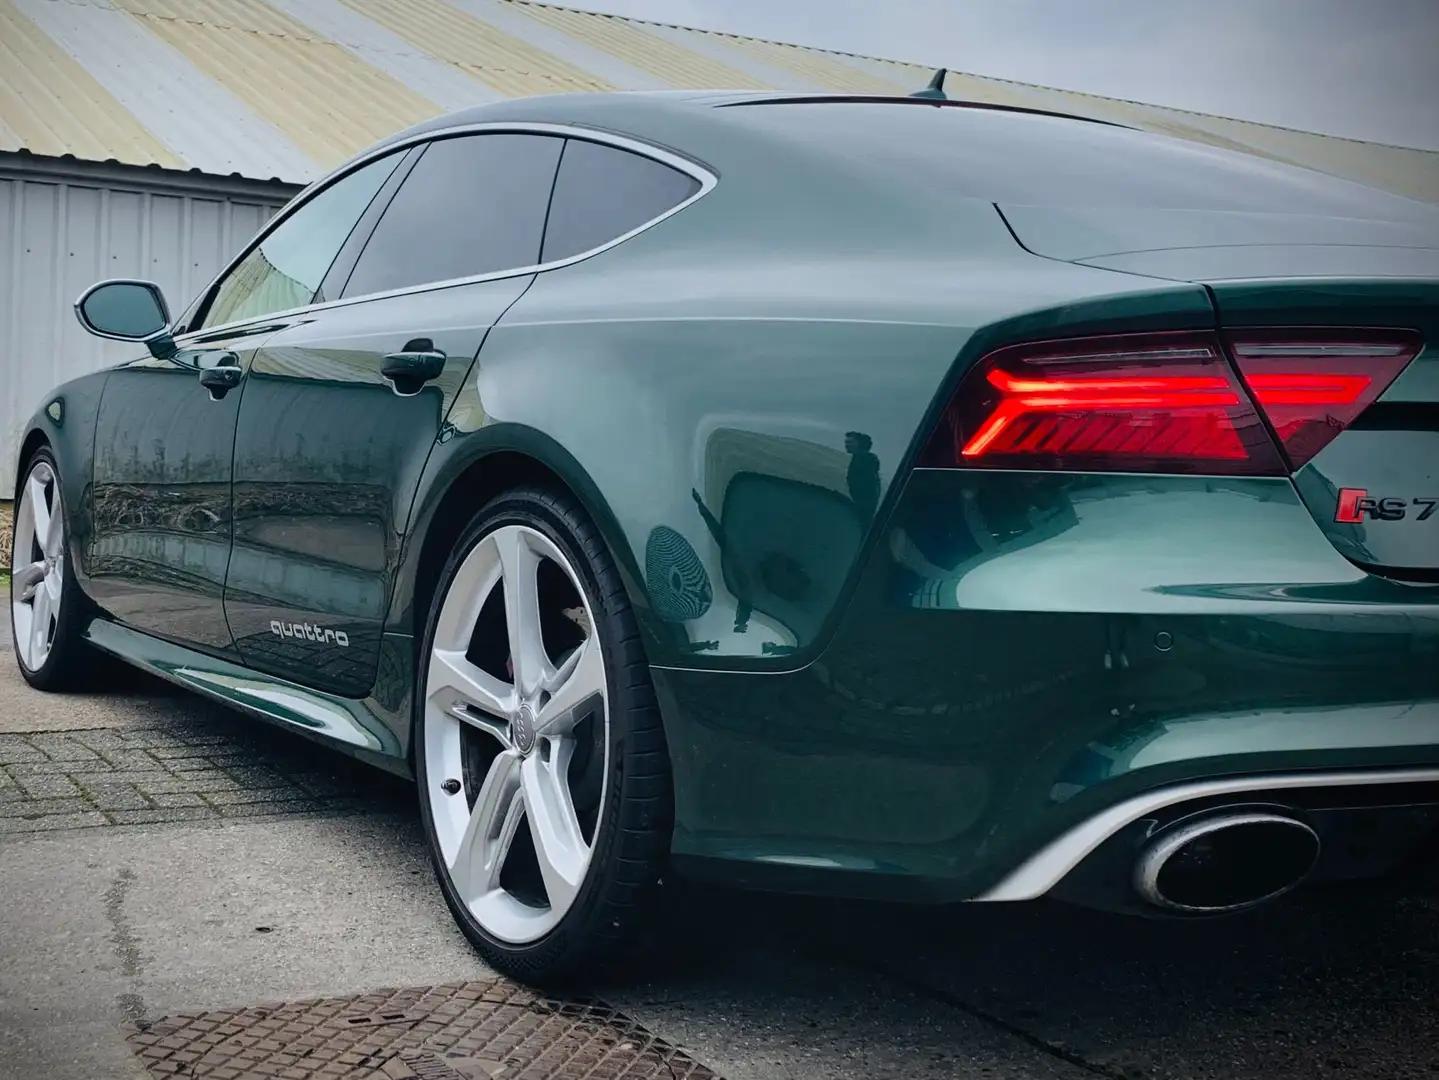 Audi RS7 Verdant Green - Audi Exclusive - from collector Zielony - 2